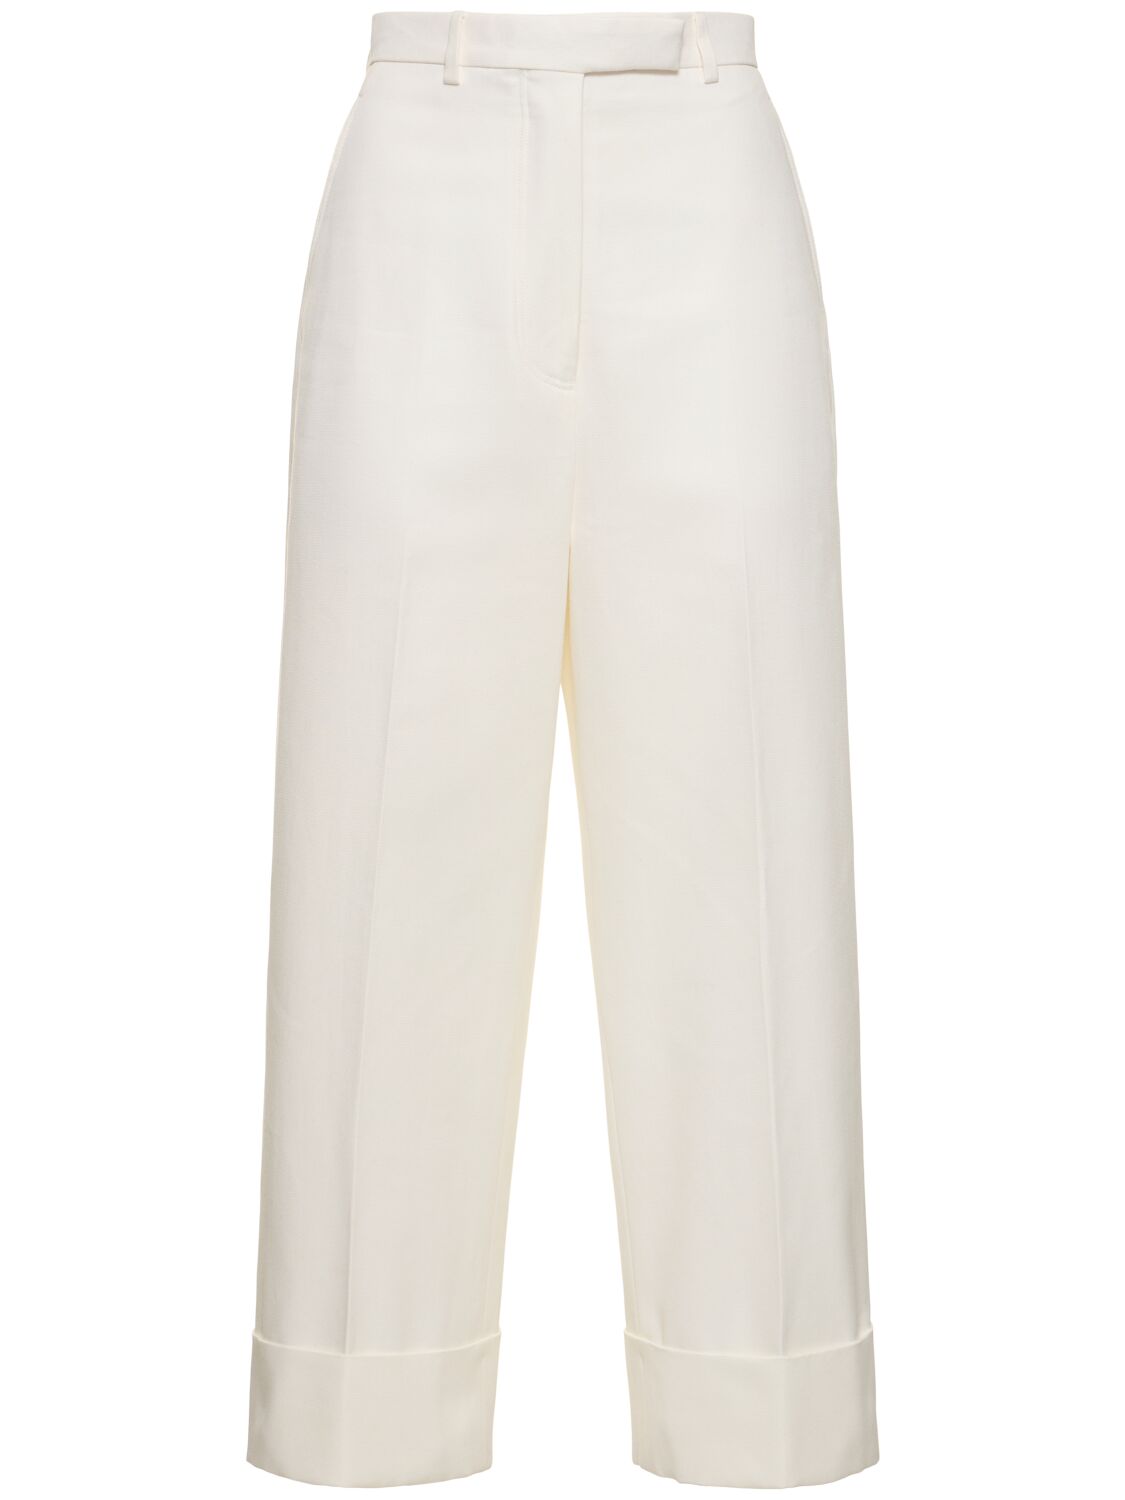 Straight Cotton High Waist Cropped Pants